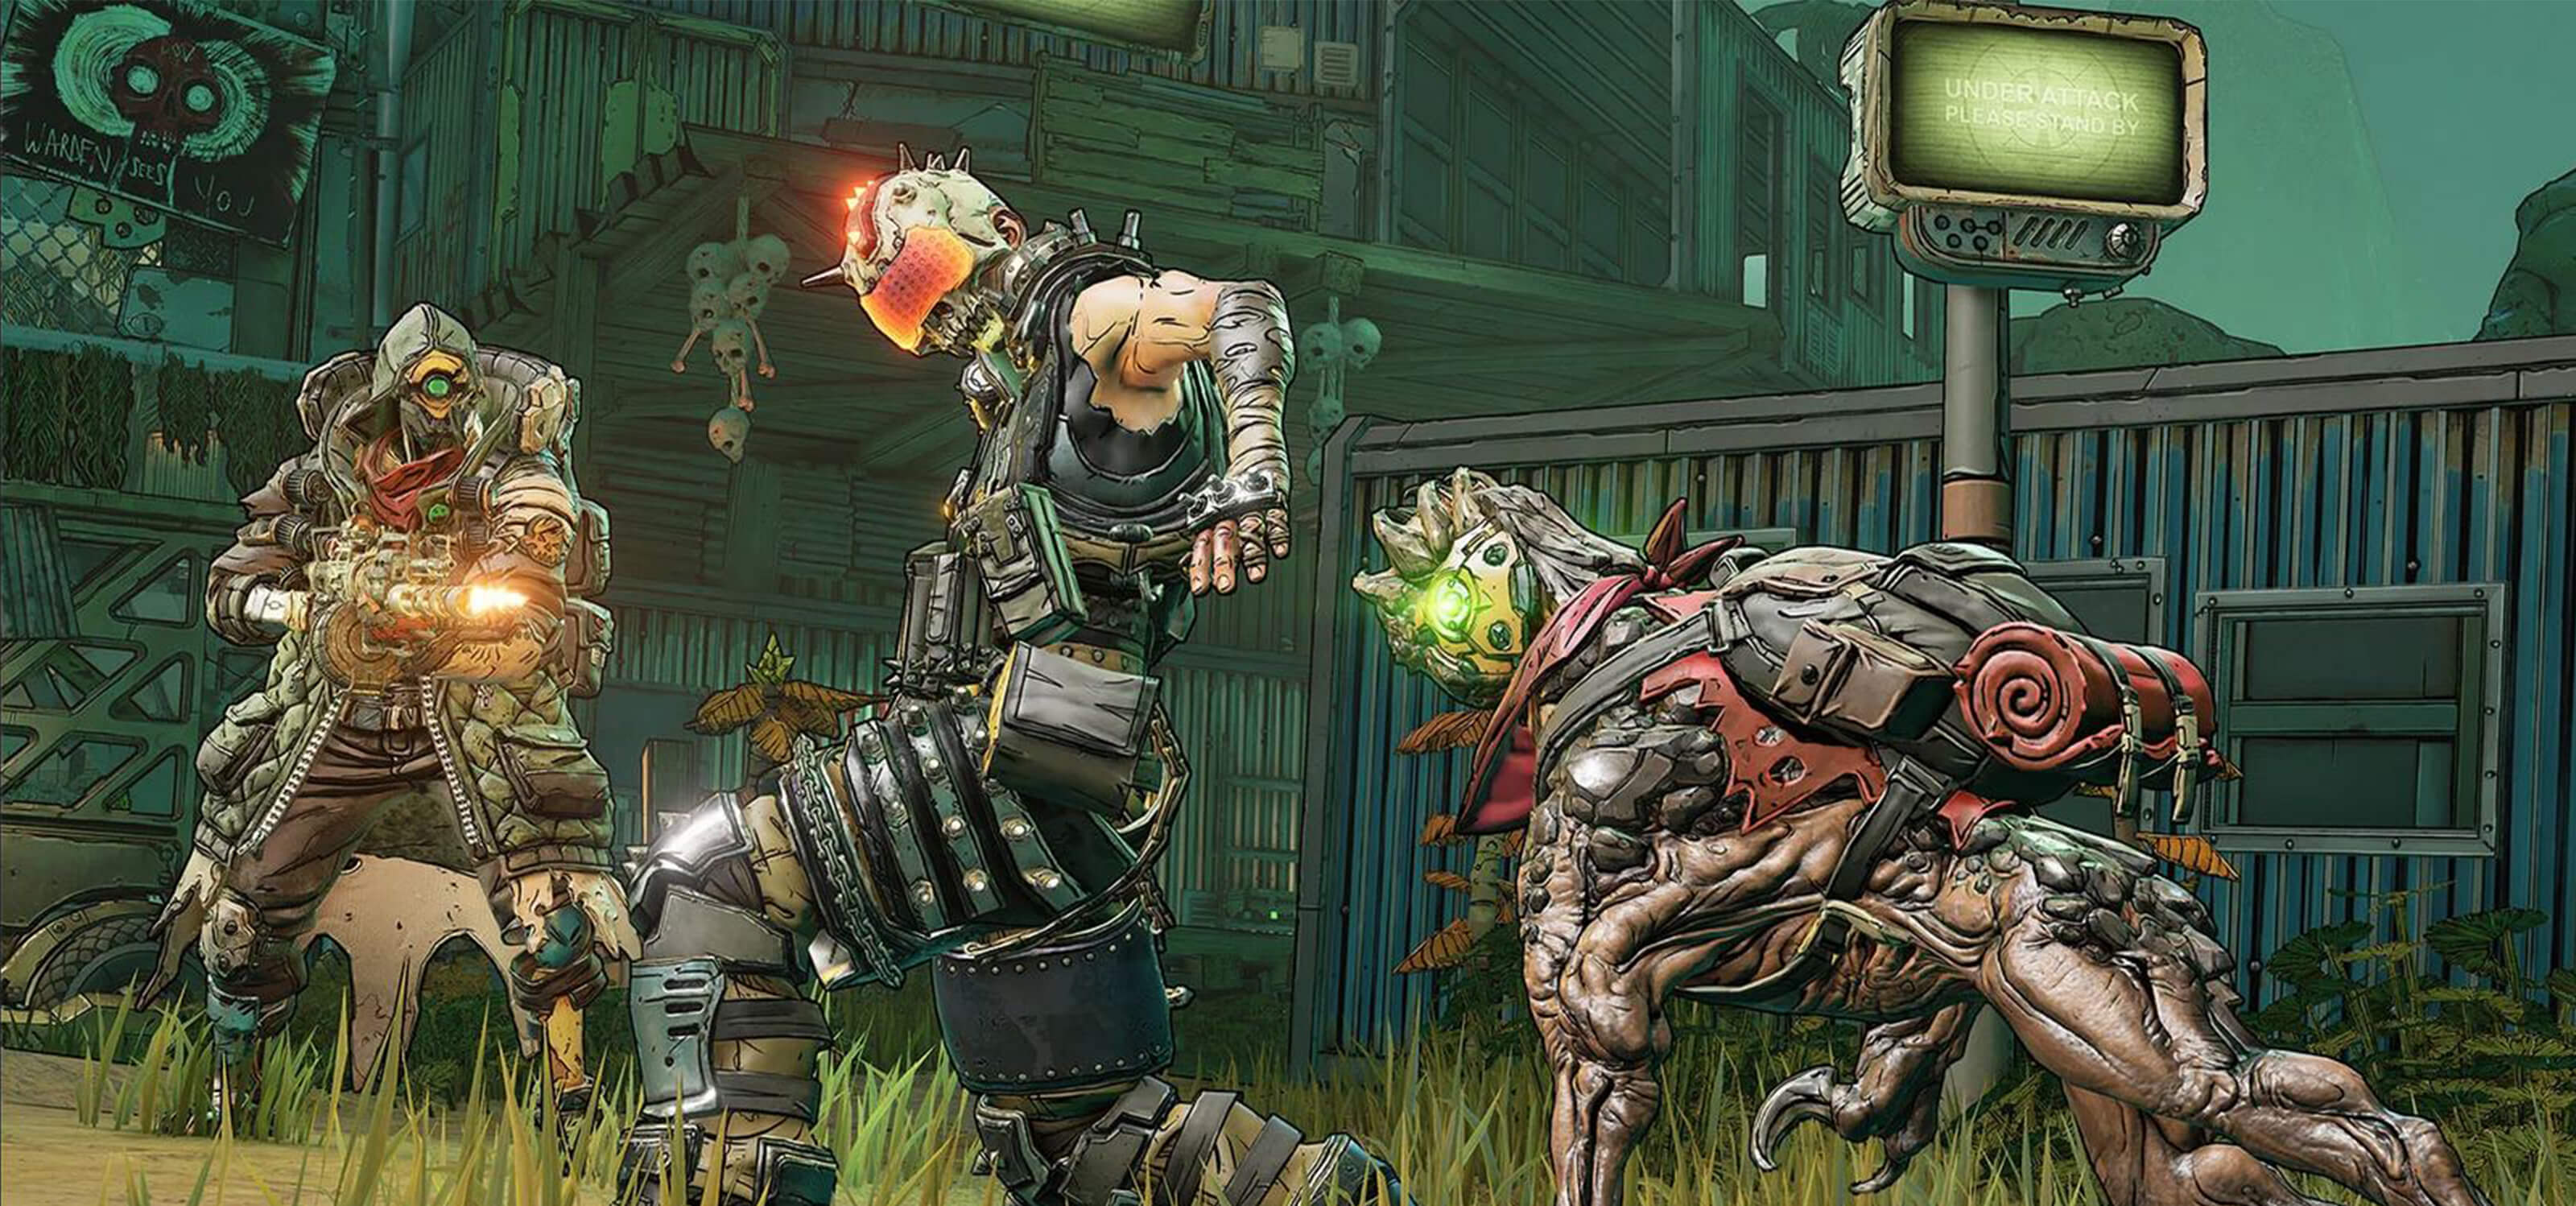 Borderlands 3 character FL4K and their dog companion surround an enemy.